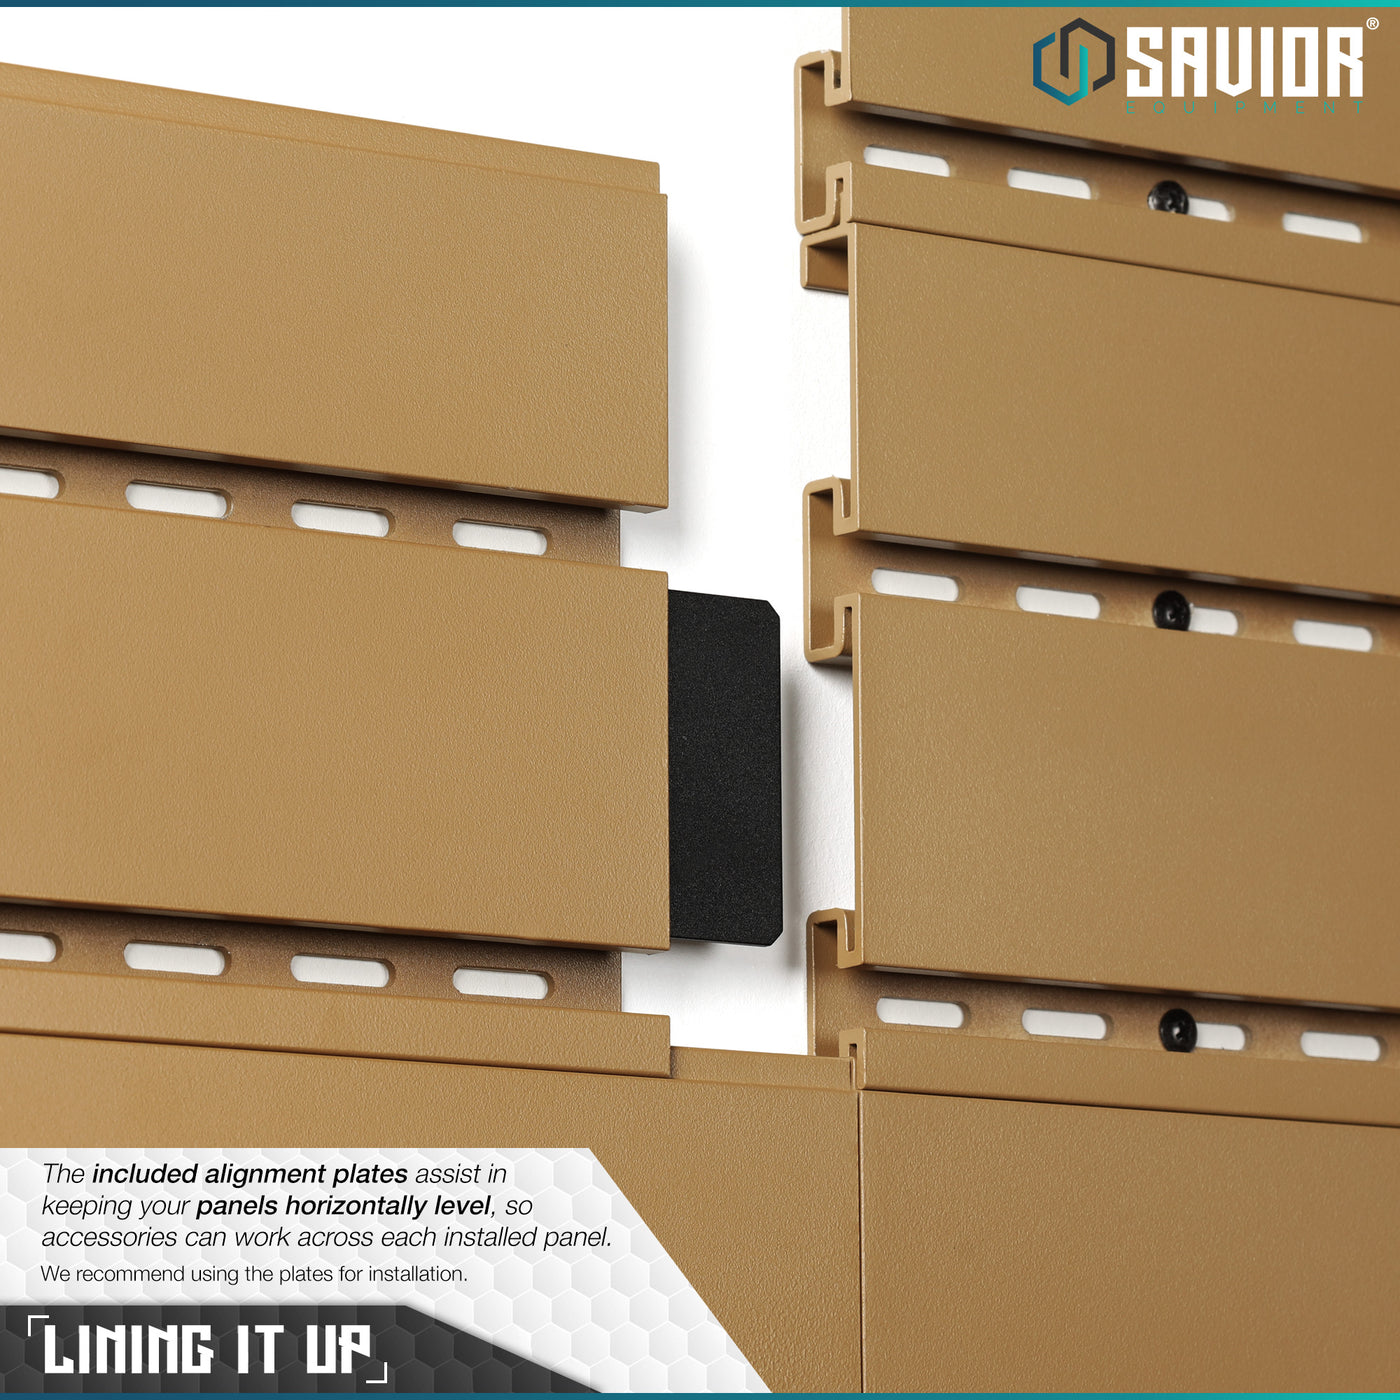 Lining It Up - The included alignment plates assist in keeping your panels horizontally level, so accessories can work across each installed panel. We recommend using the plates for installation.